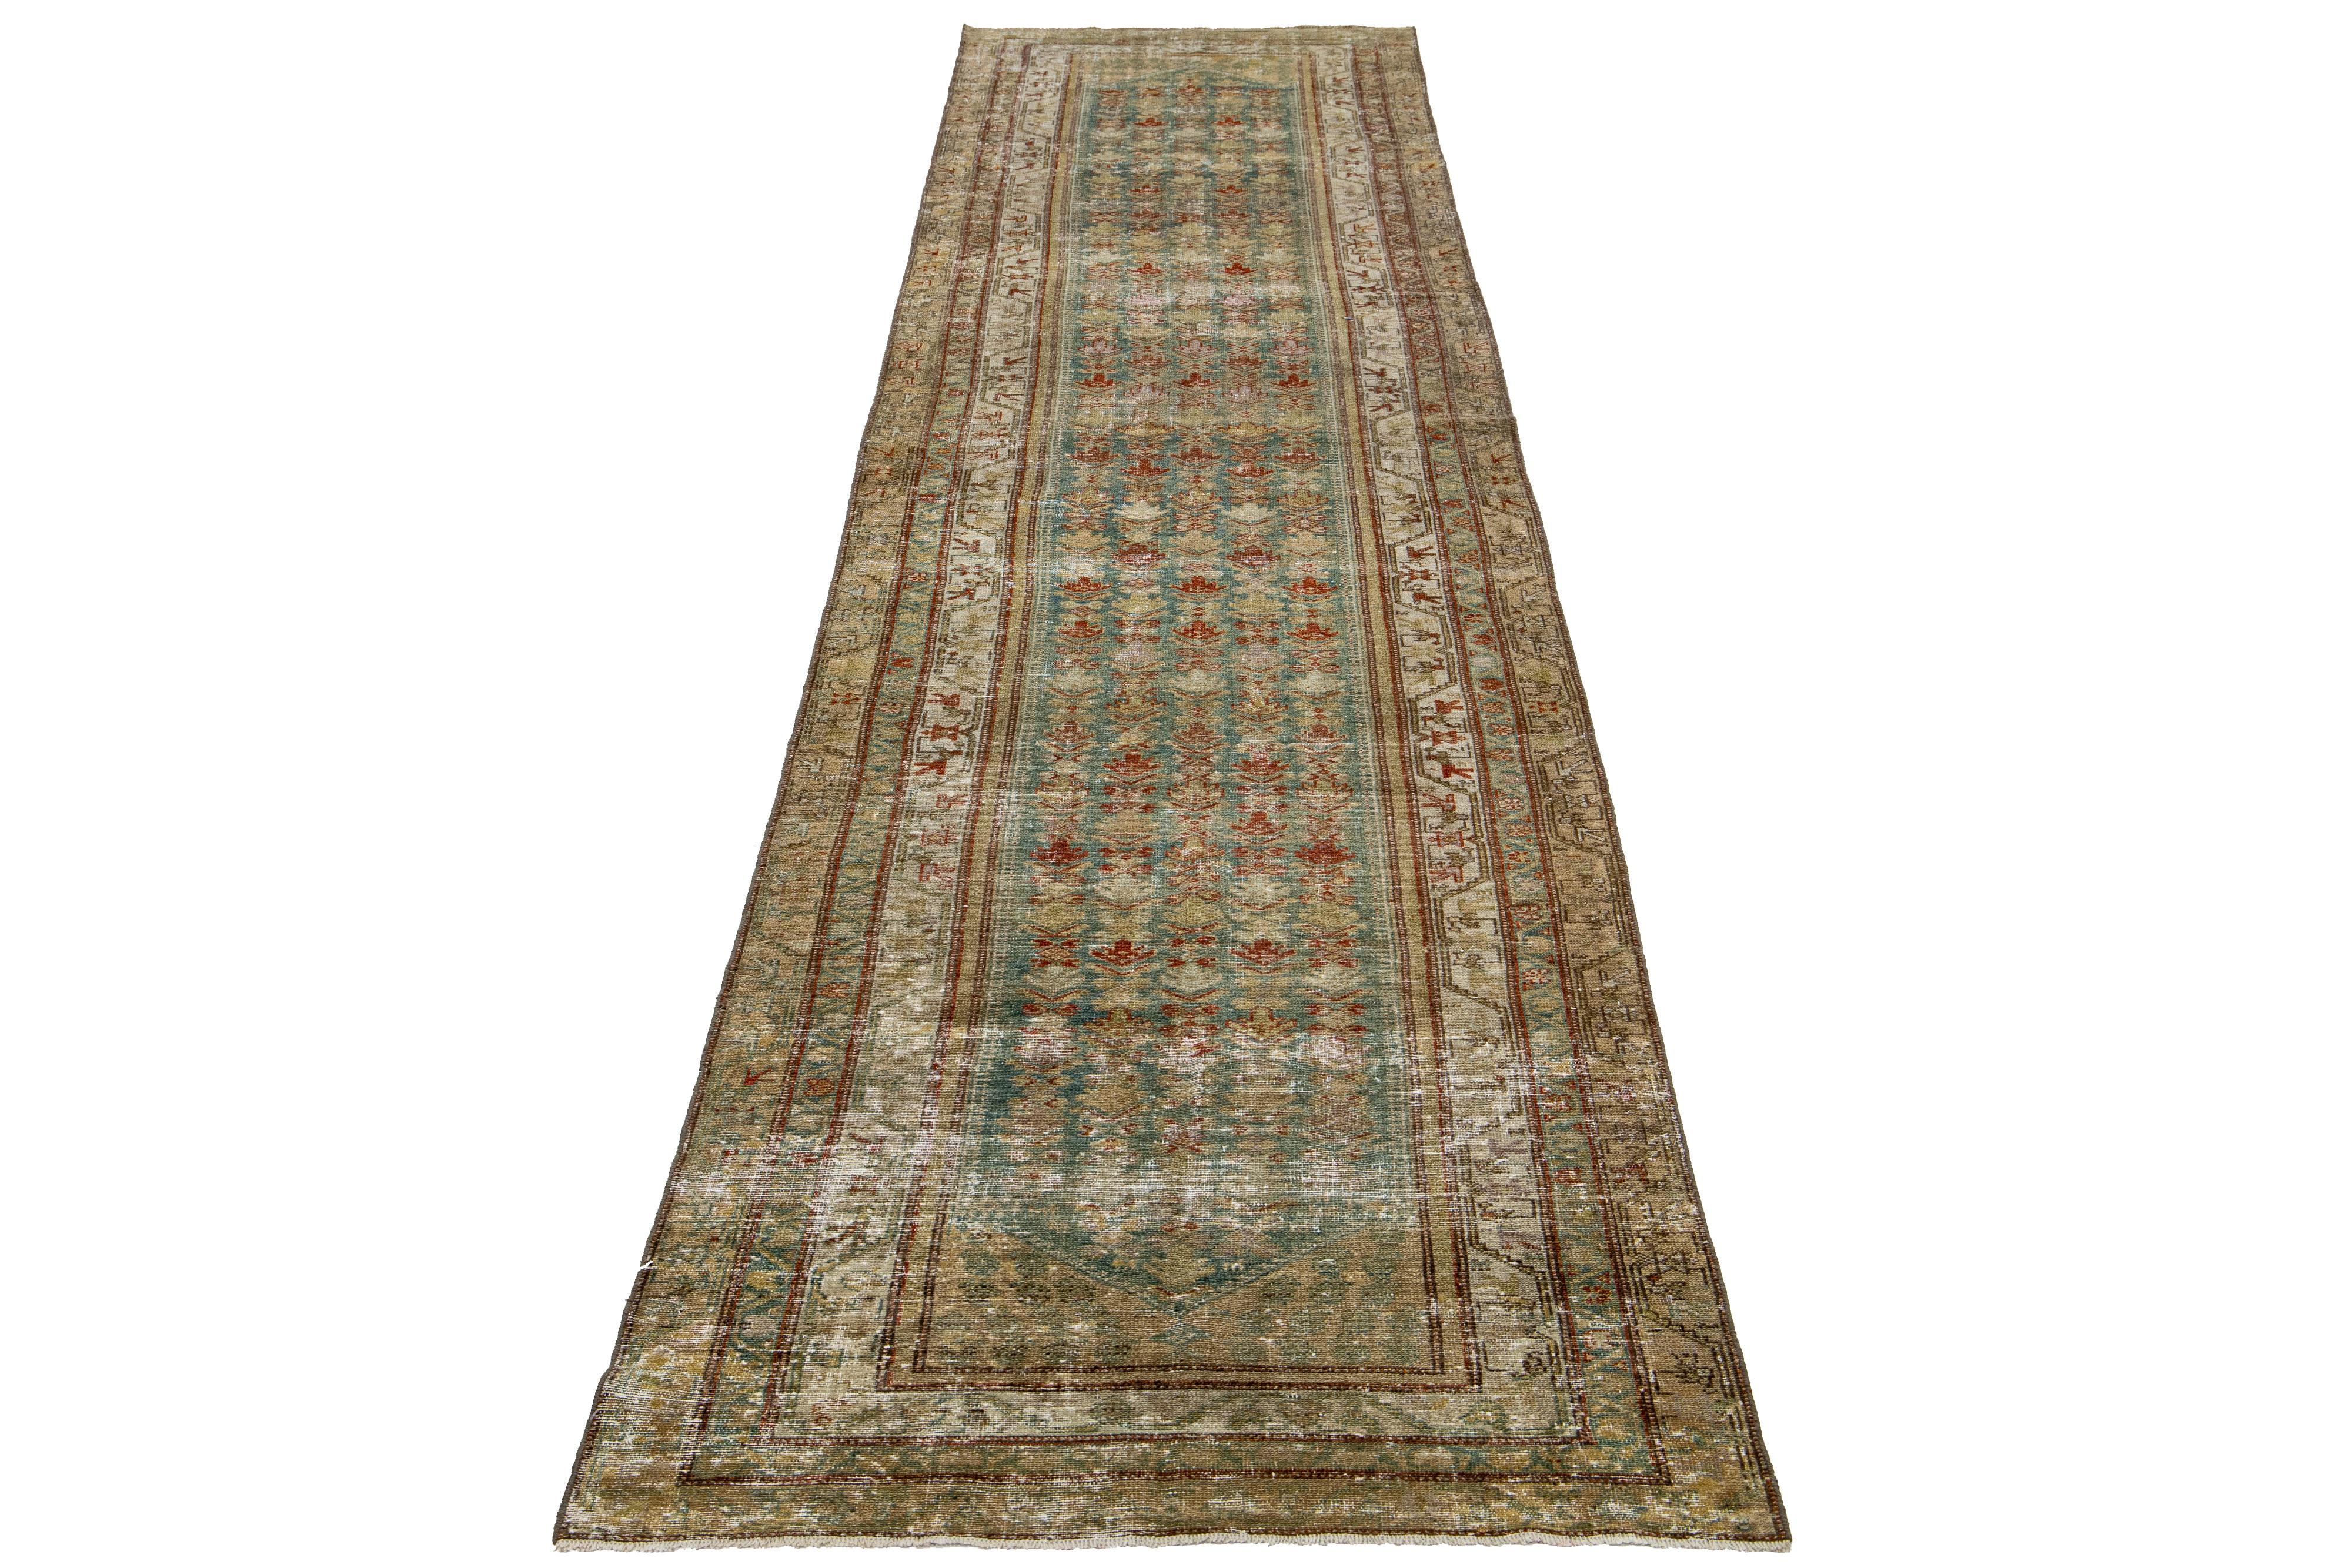 This Persian Malayer wool rug possesses an antique allure. It showcases hand-knotted wool in a teal color field. The tribal pattern is embellished with rust, blue, and green accents.

This rug measures 3'5